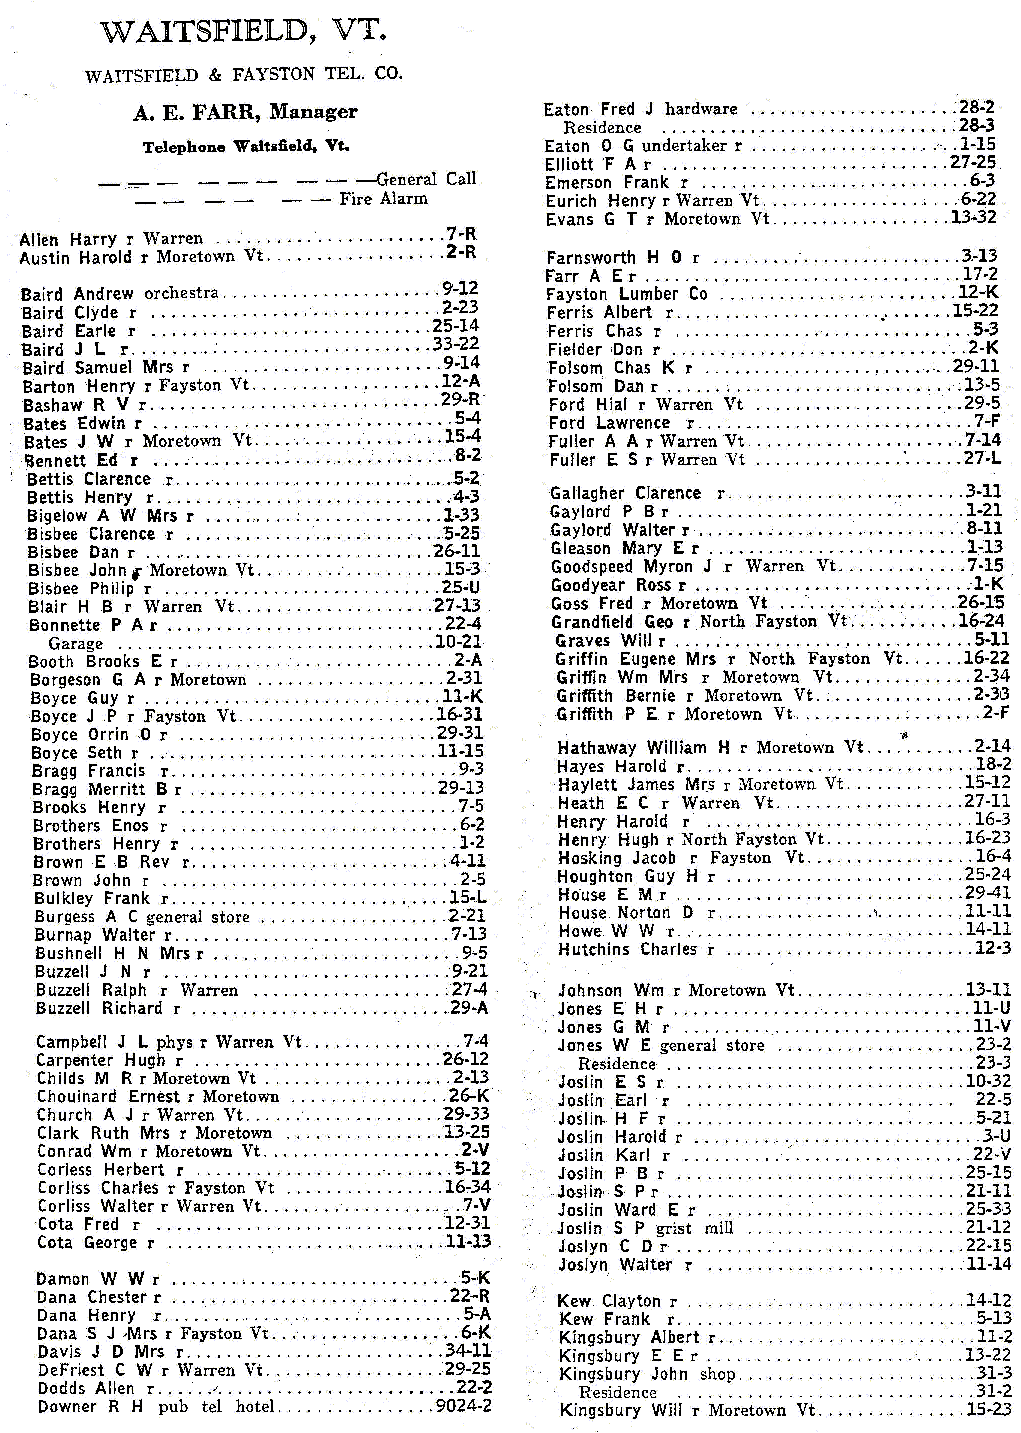 1928 Waitsfield Vt Telephone Book - Page 51